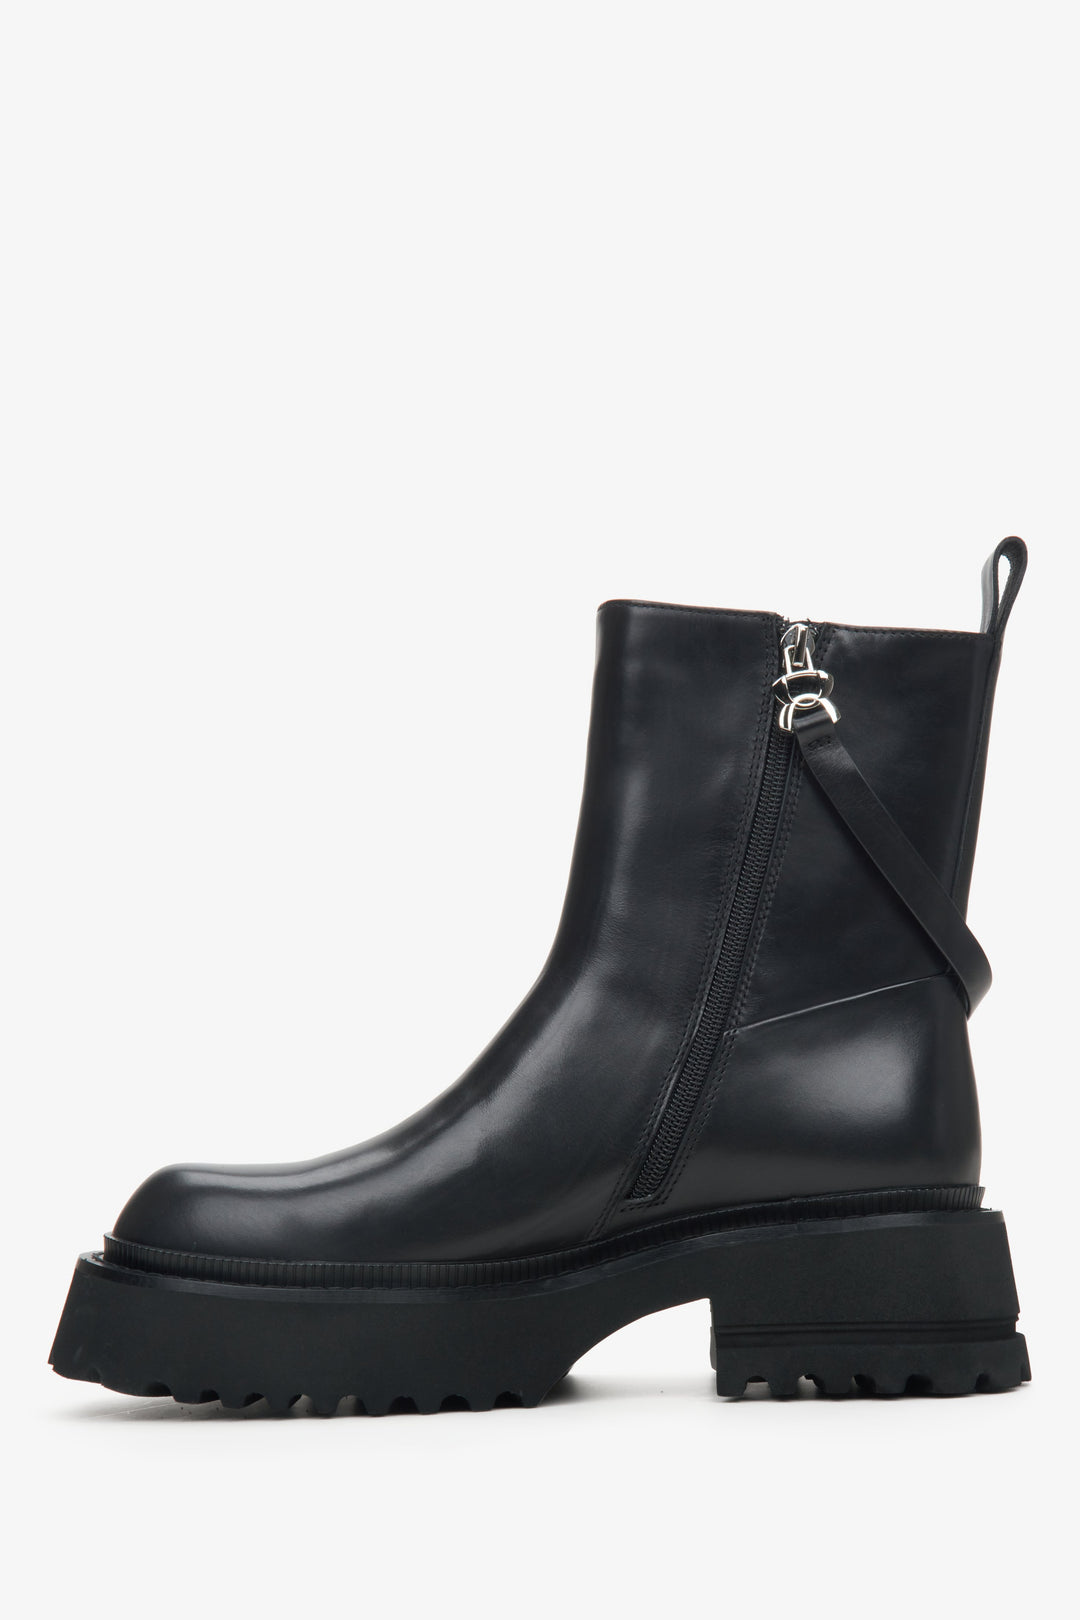 Women's boots made of genuine leather in black by Estro - shoe profile.